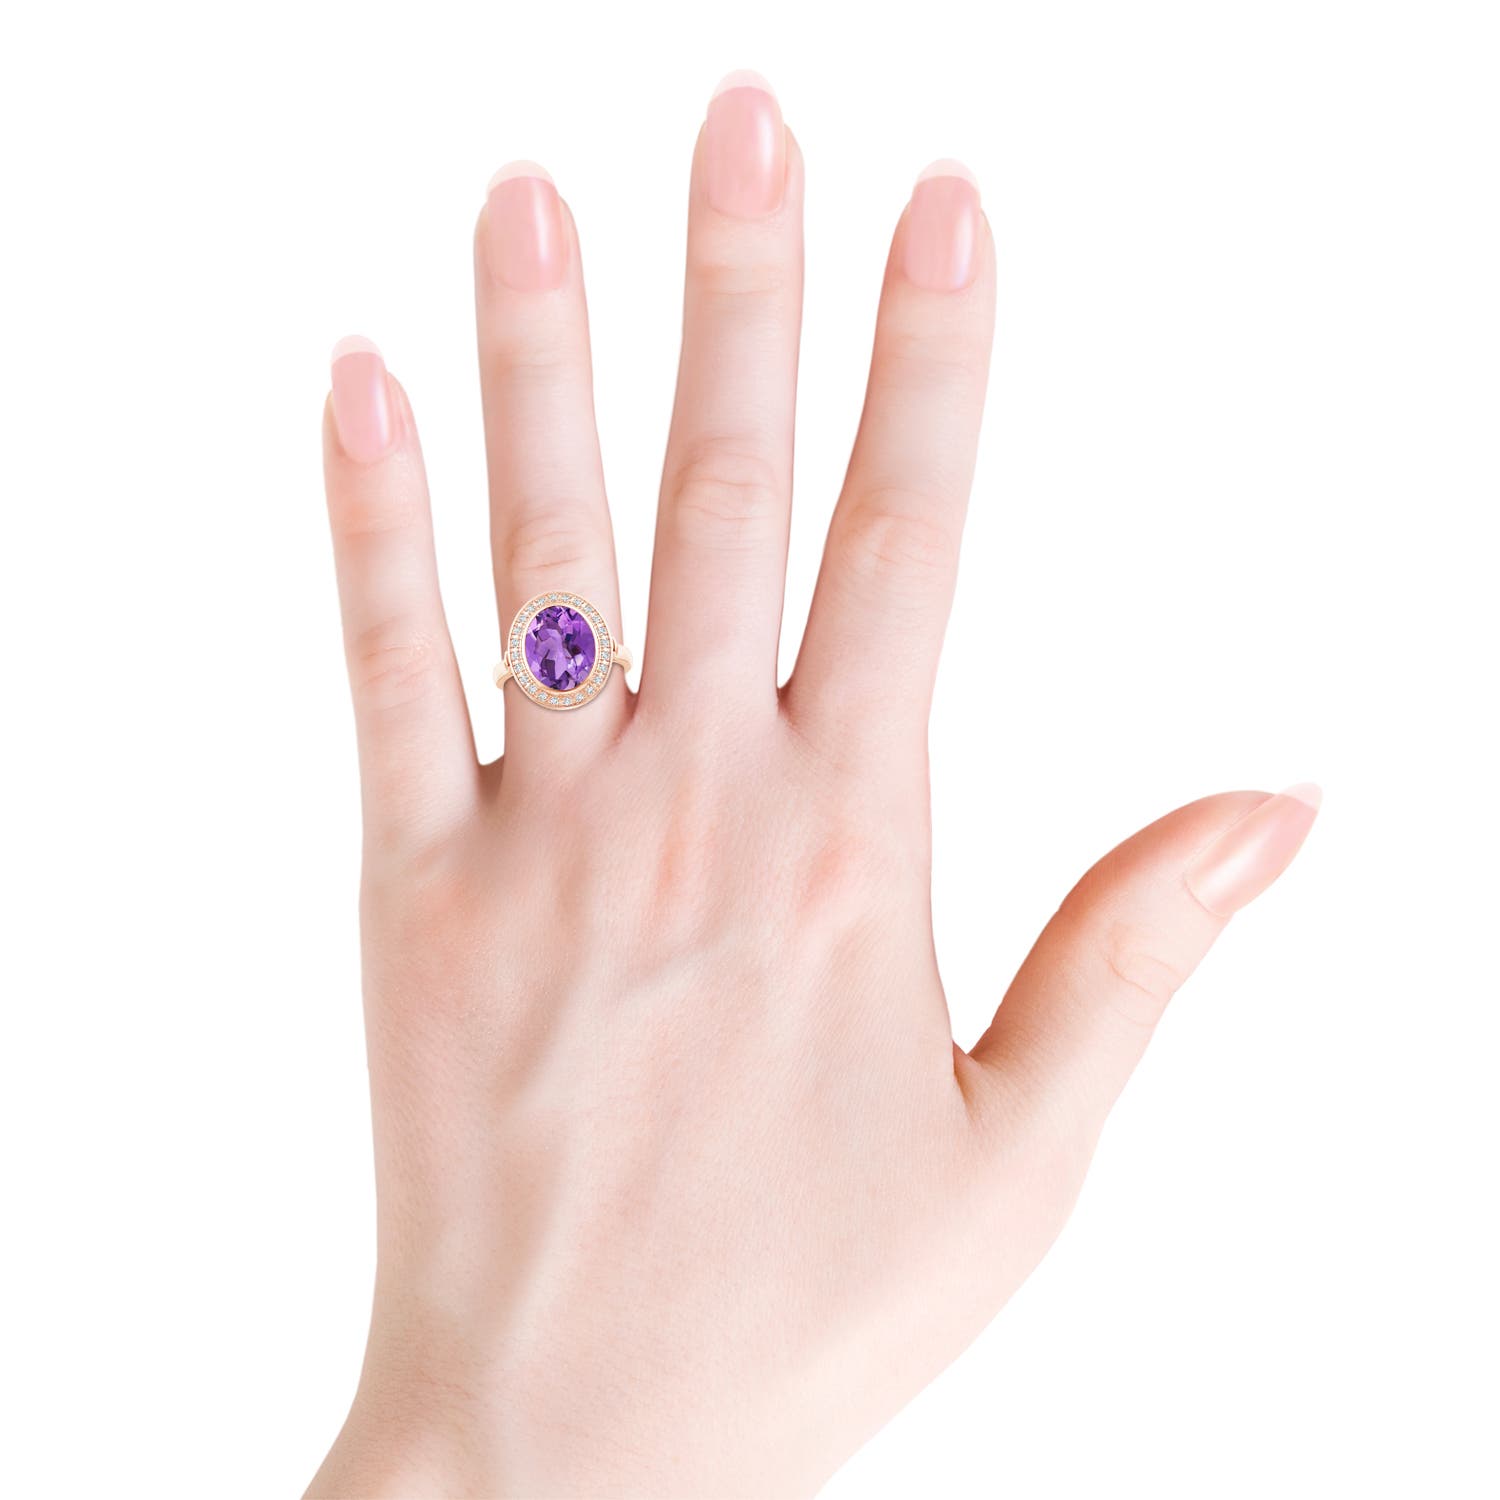 AA - Amethyst / 3.34 CT / 14 KT Rose Gold